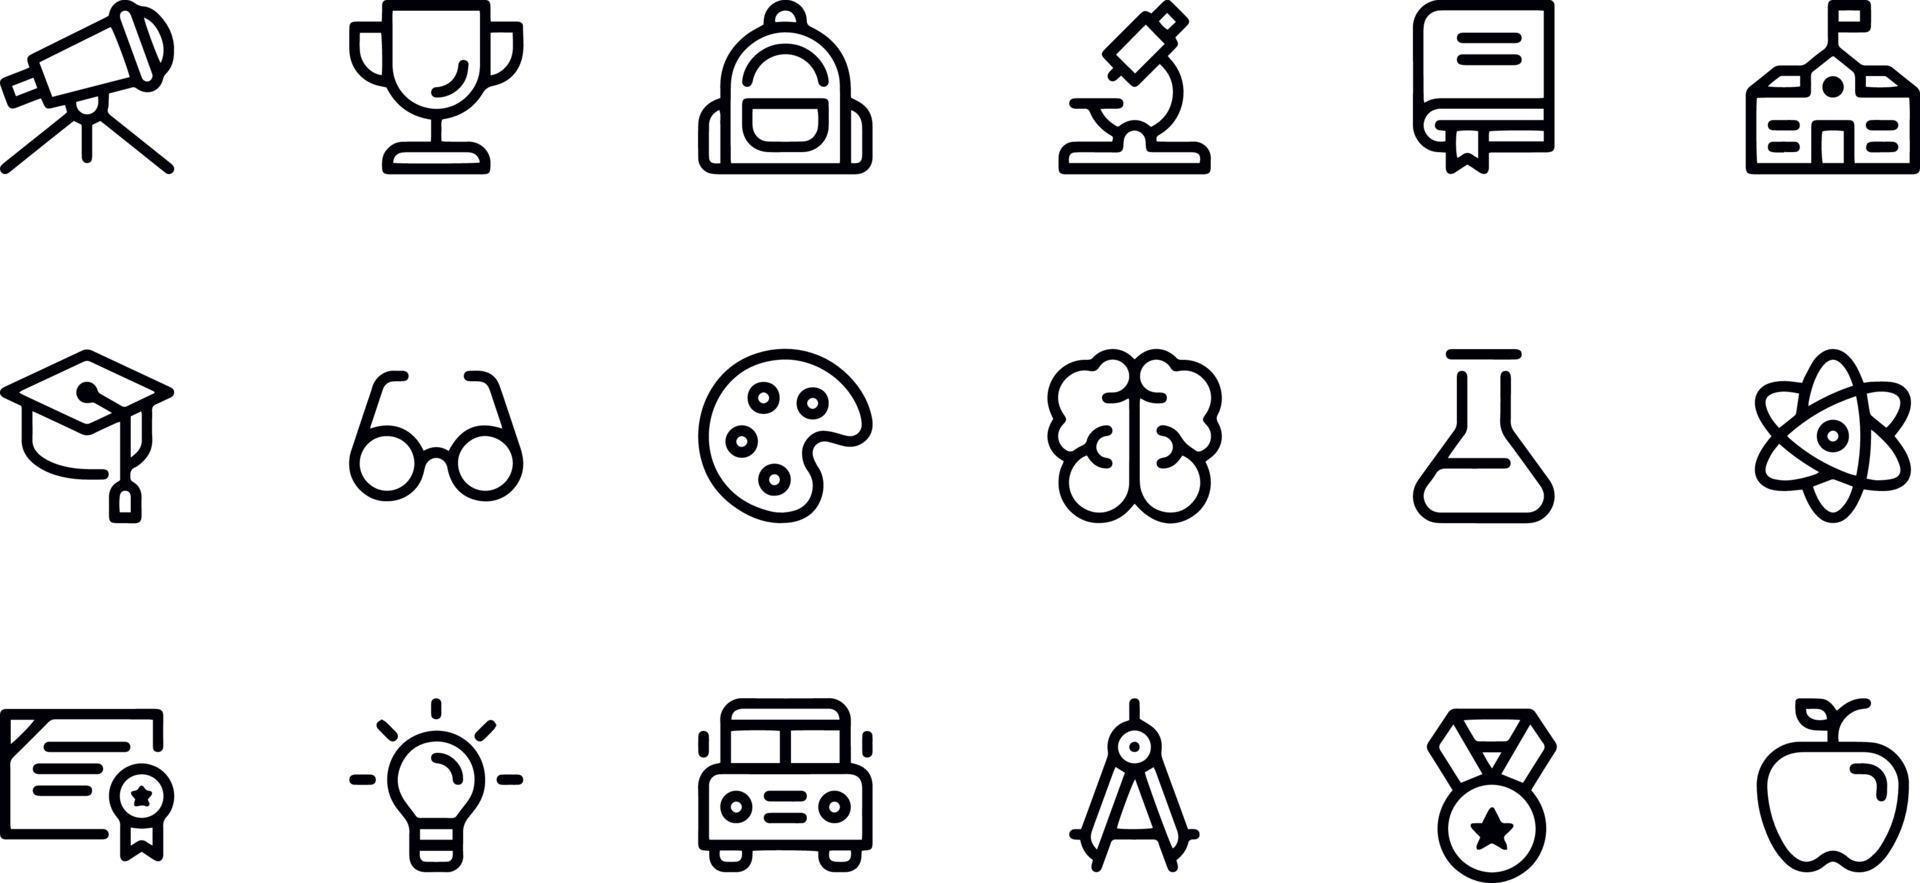 education icons vector design